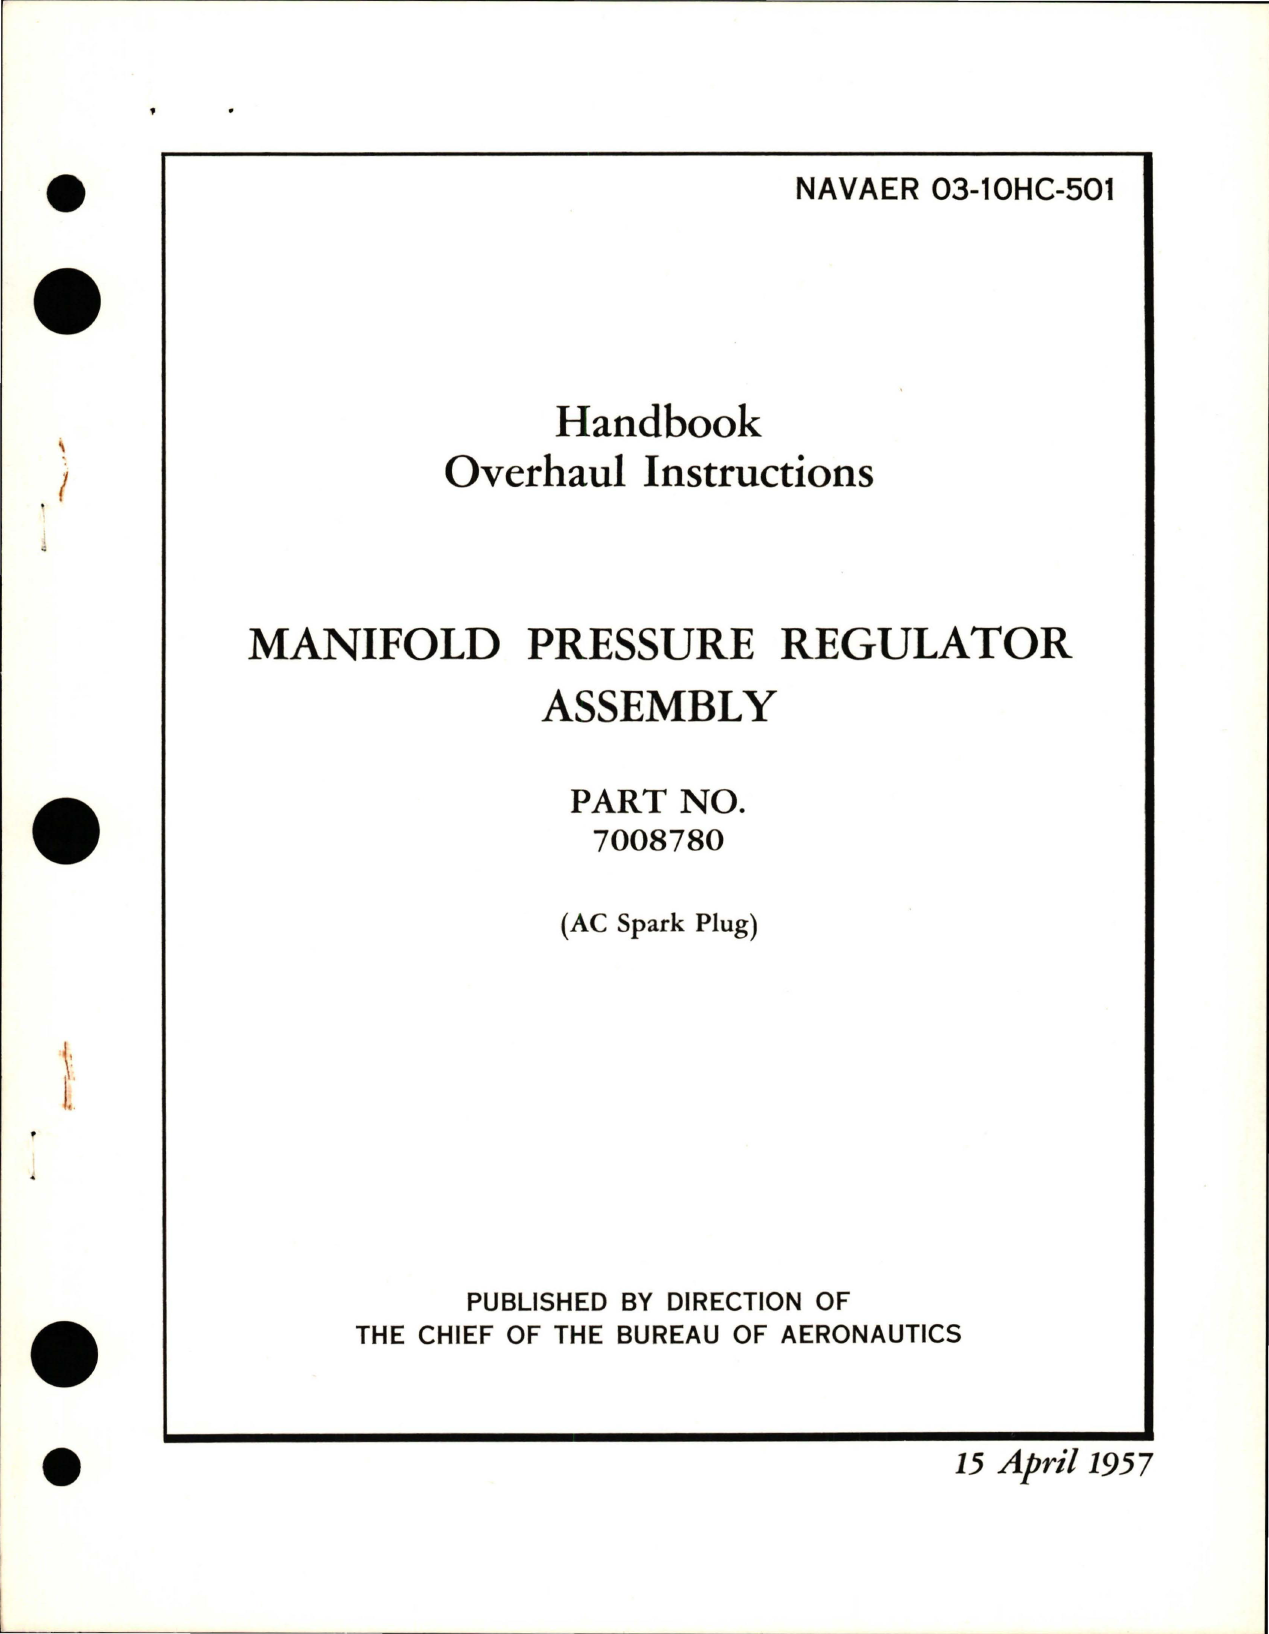 Sample page 1 from AirCorps Library document: Overhaul Instructions for Manifold Pressure Regulator Assembly - Part 7008780